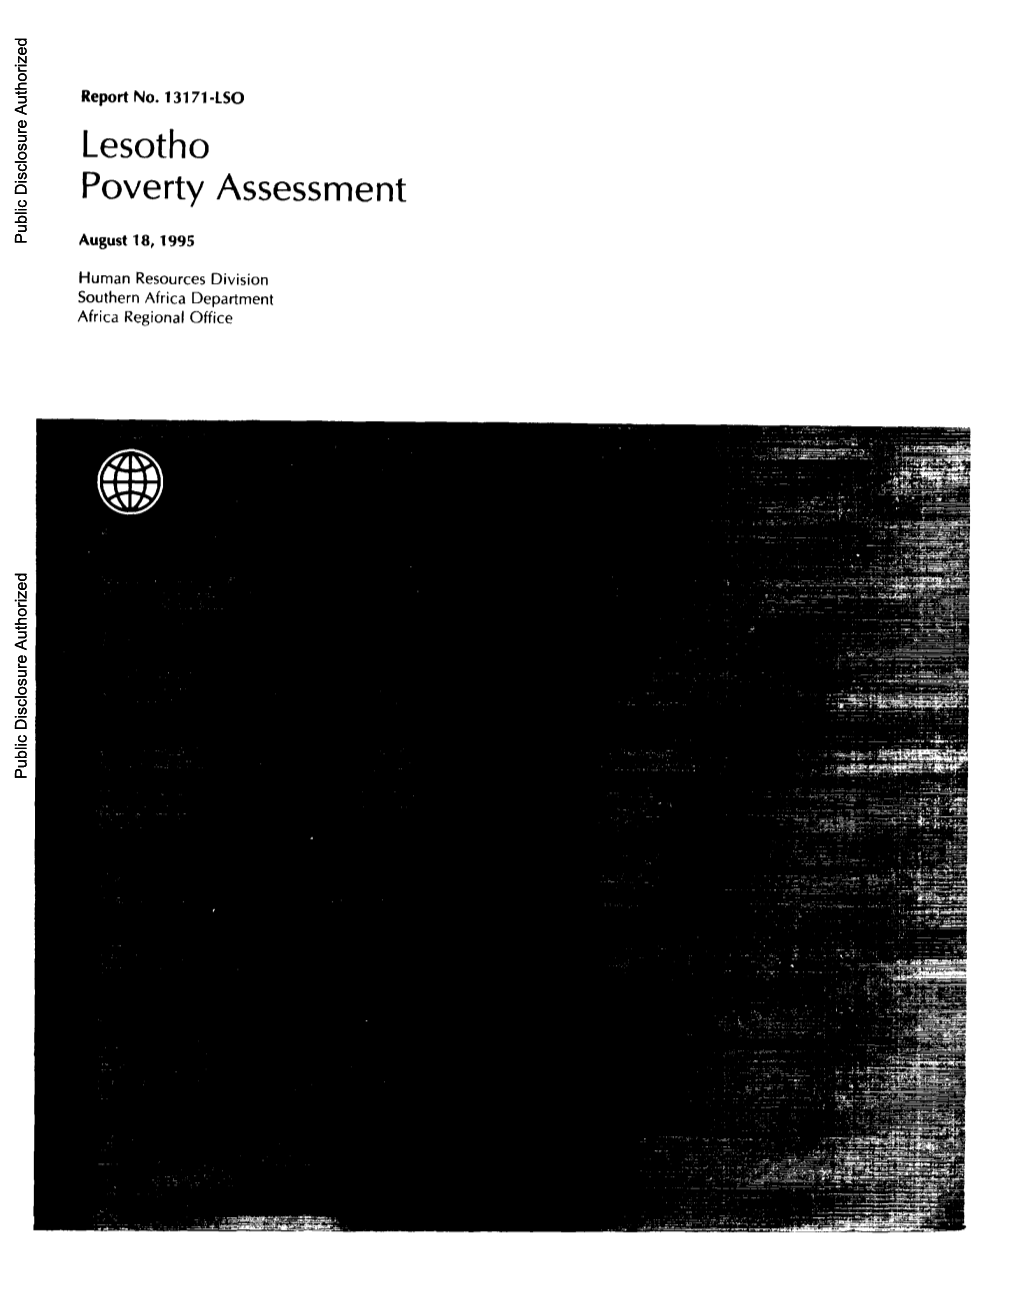 Lesotho Poverty Assessment